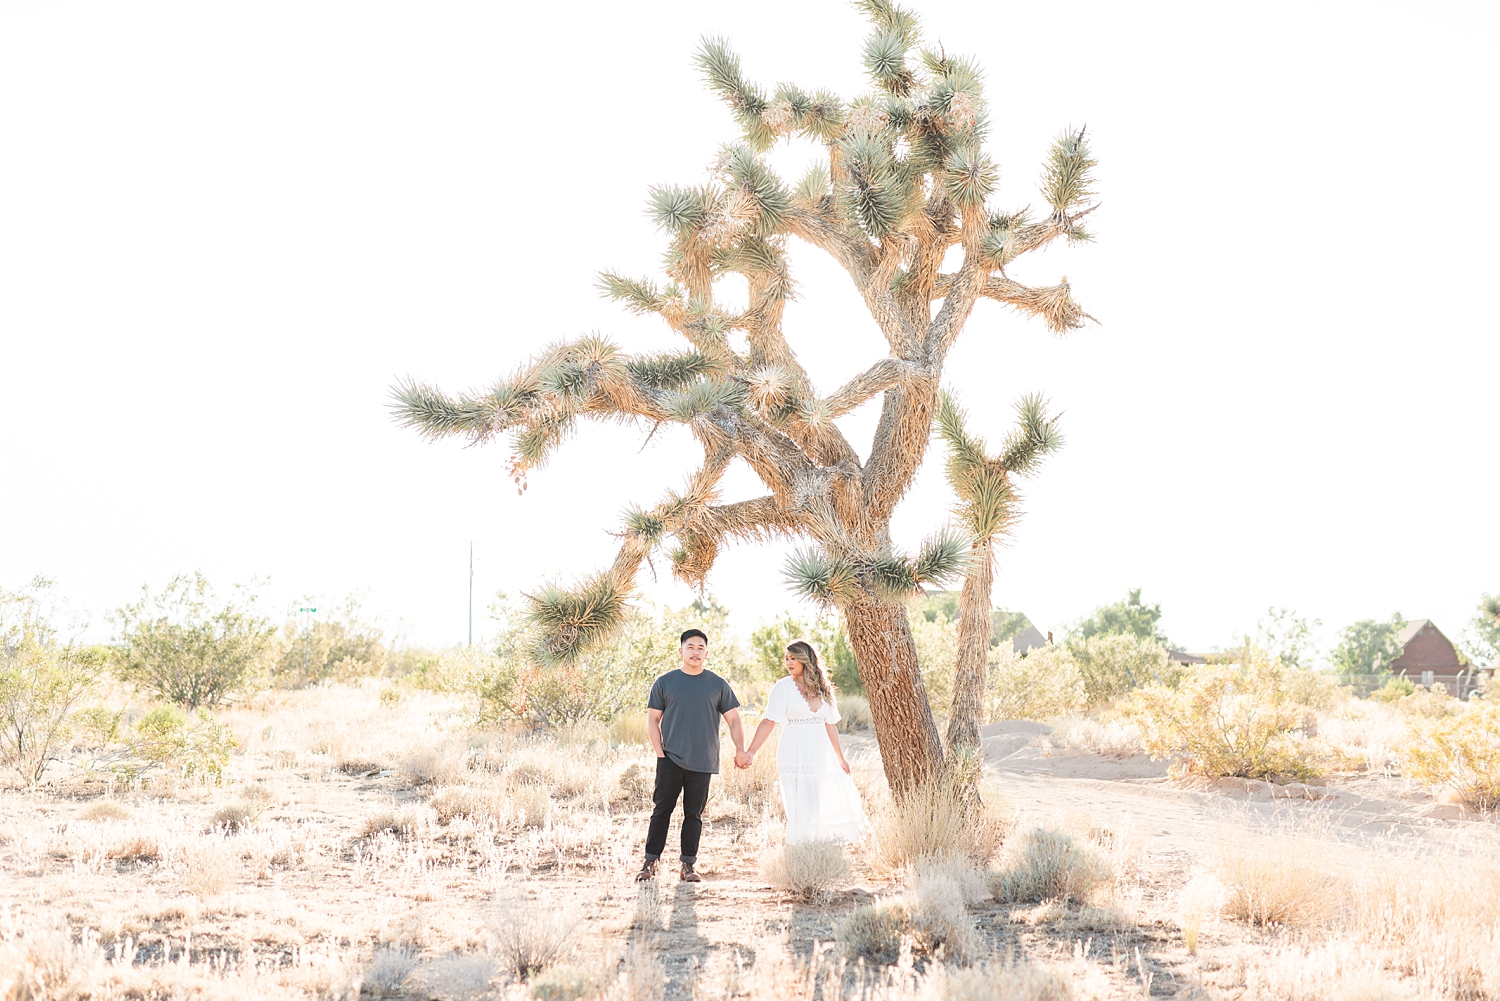 location ideas for engagement photos in southern california_0155.jpg